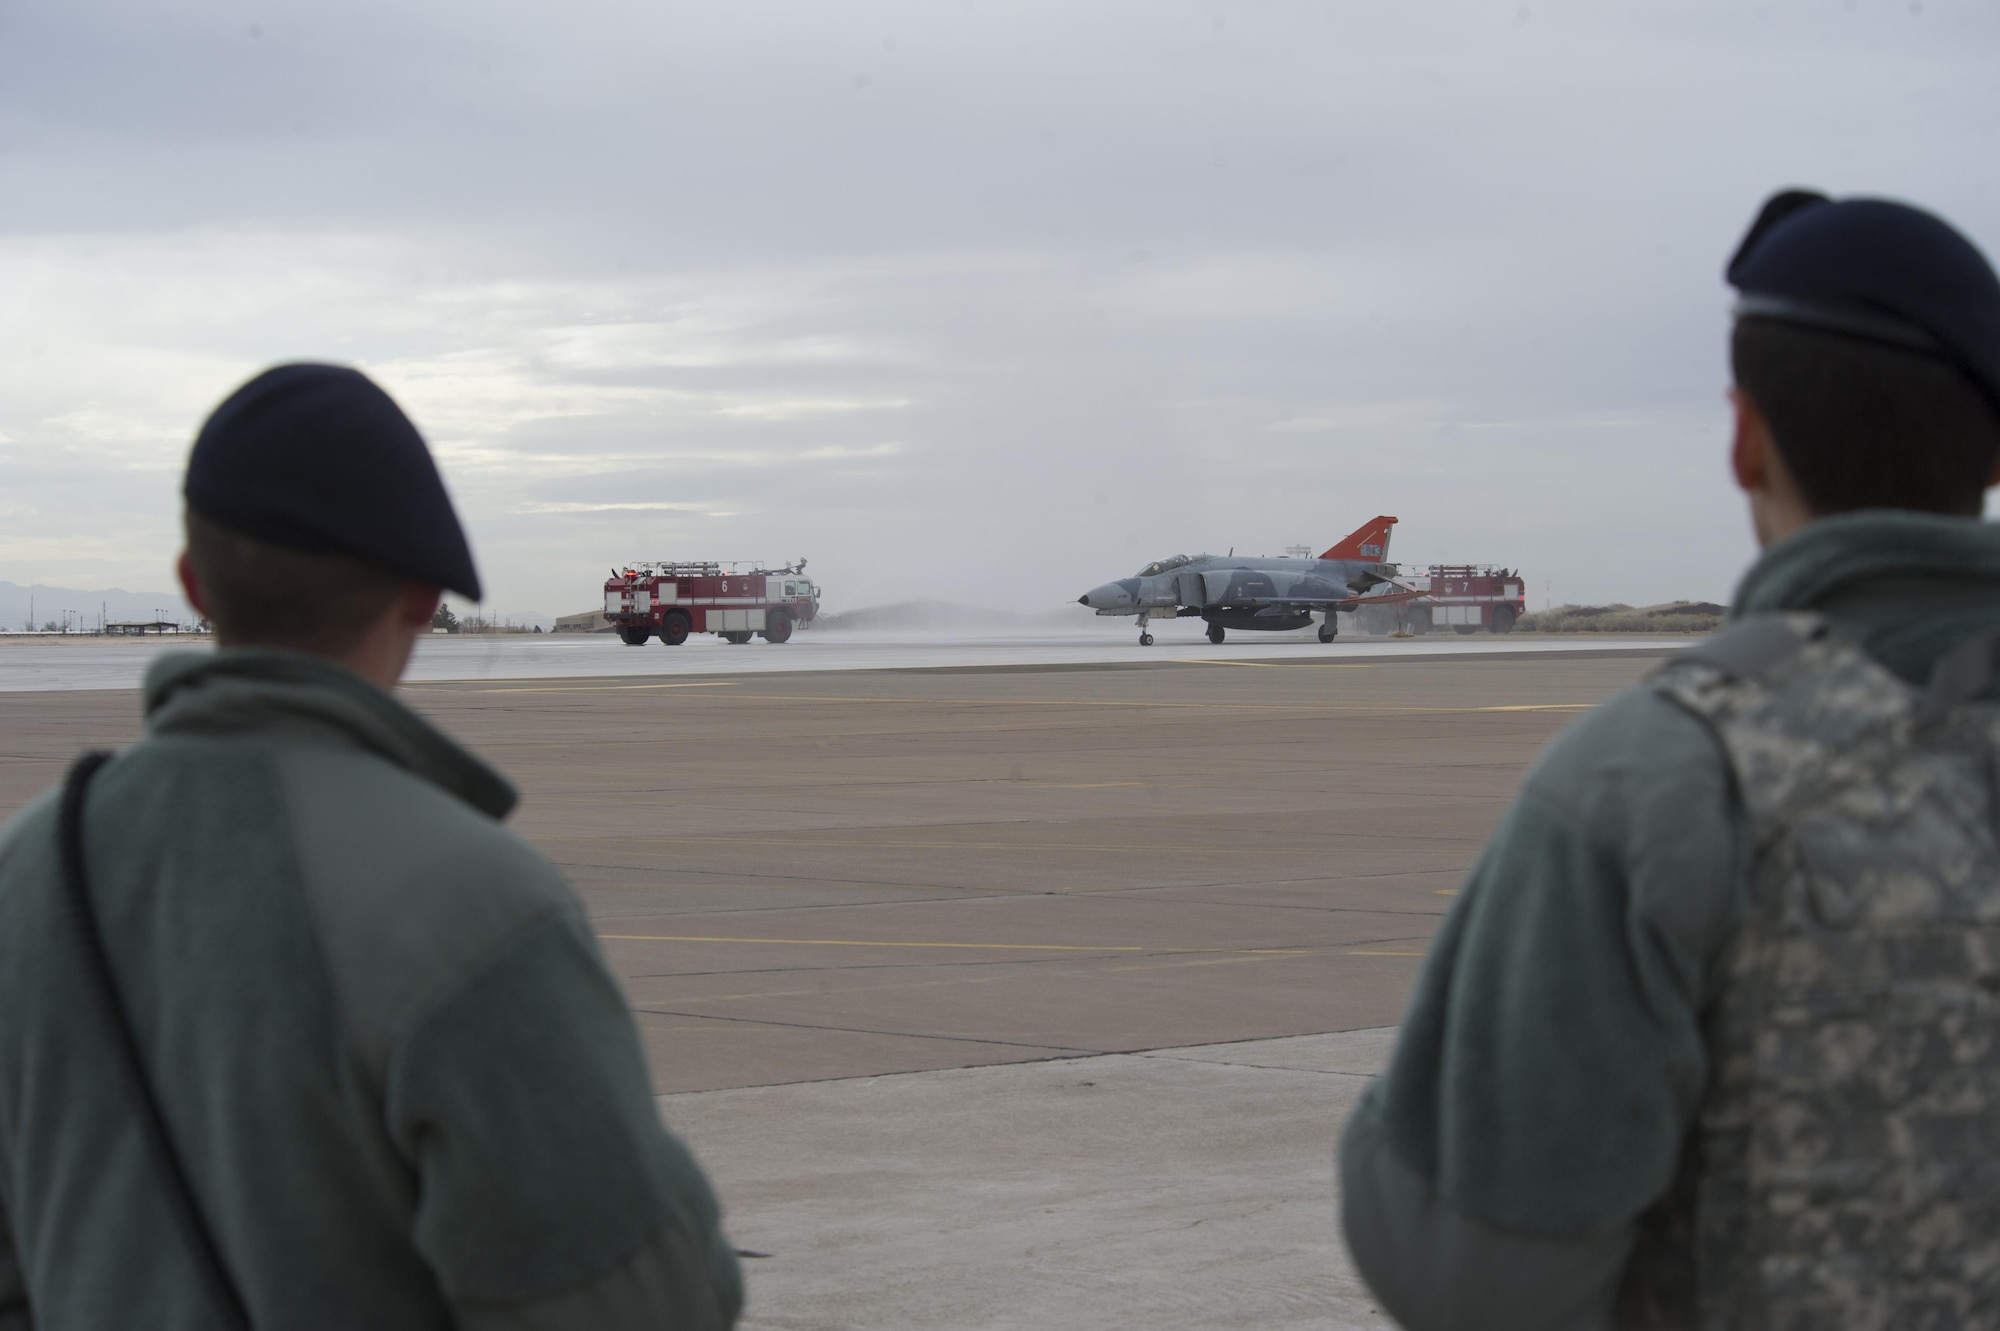 Airmen from the 49th Wing Security Forces Squadron watch a QF-4 Phantom taxi in after its last flight as part of the QF-4 Phinal Phlight event Dec. 21, 2016 at Holloman Air Force Base, N.M. Hundreds of people were in attendance to commemorate the aircraft’s retirement, marking the end of the aircraft’s 53 years of service to the Air Force. (U.S. Air Force photo by Master Sgt. Matthew McGovern)